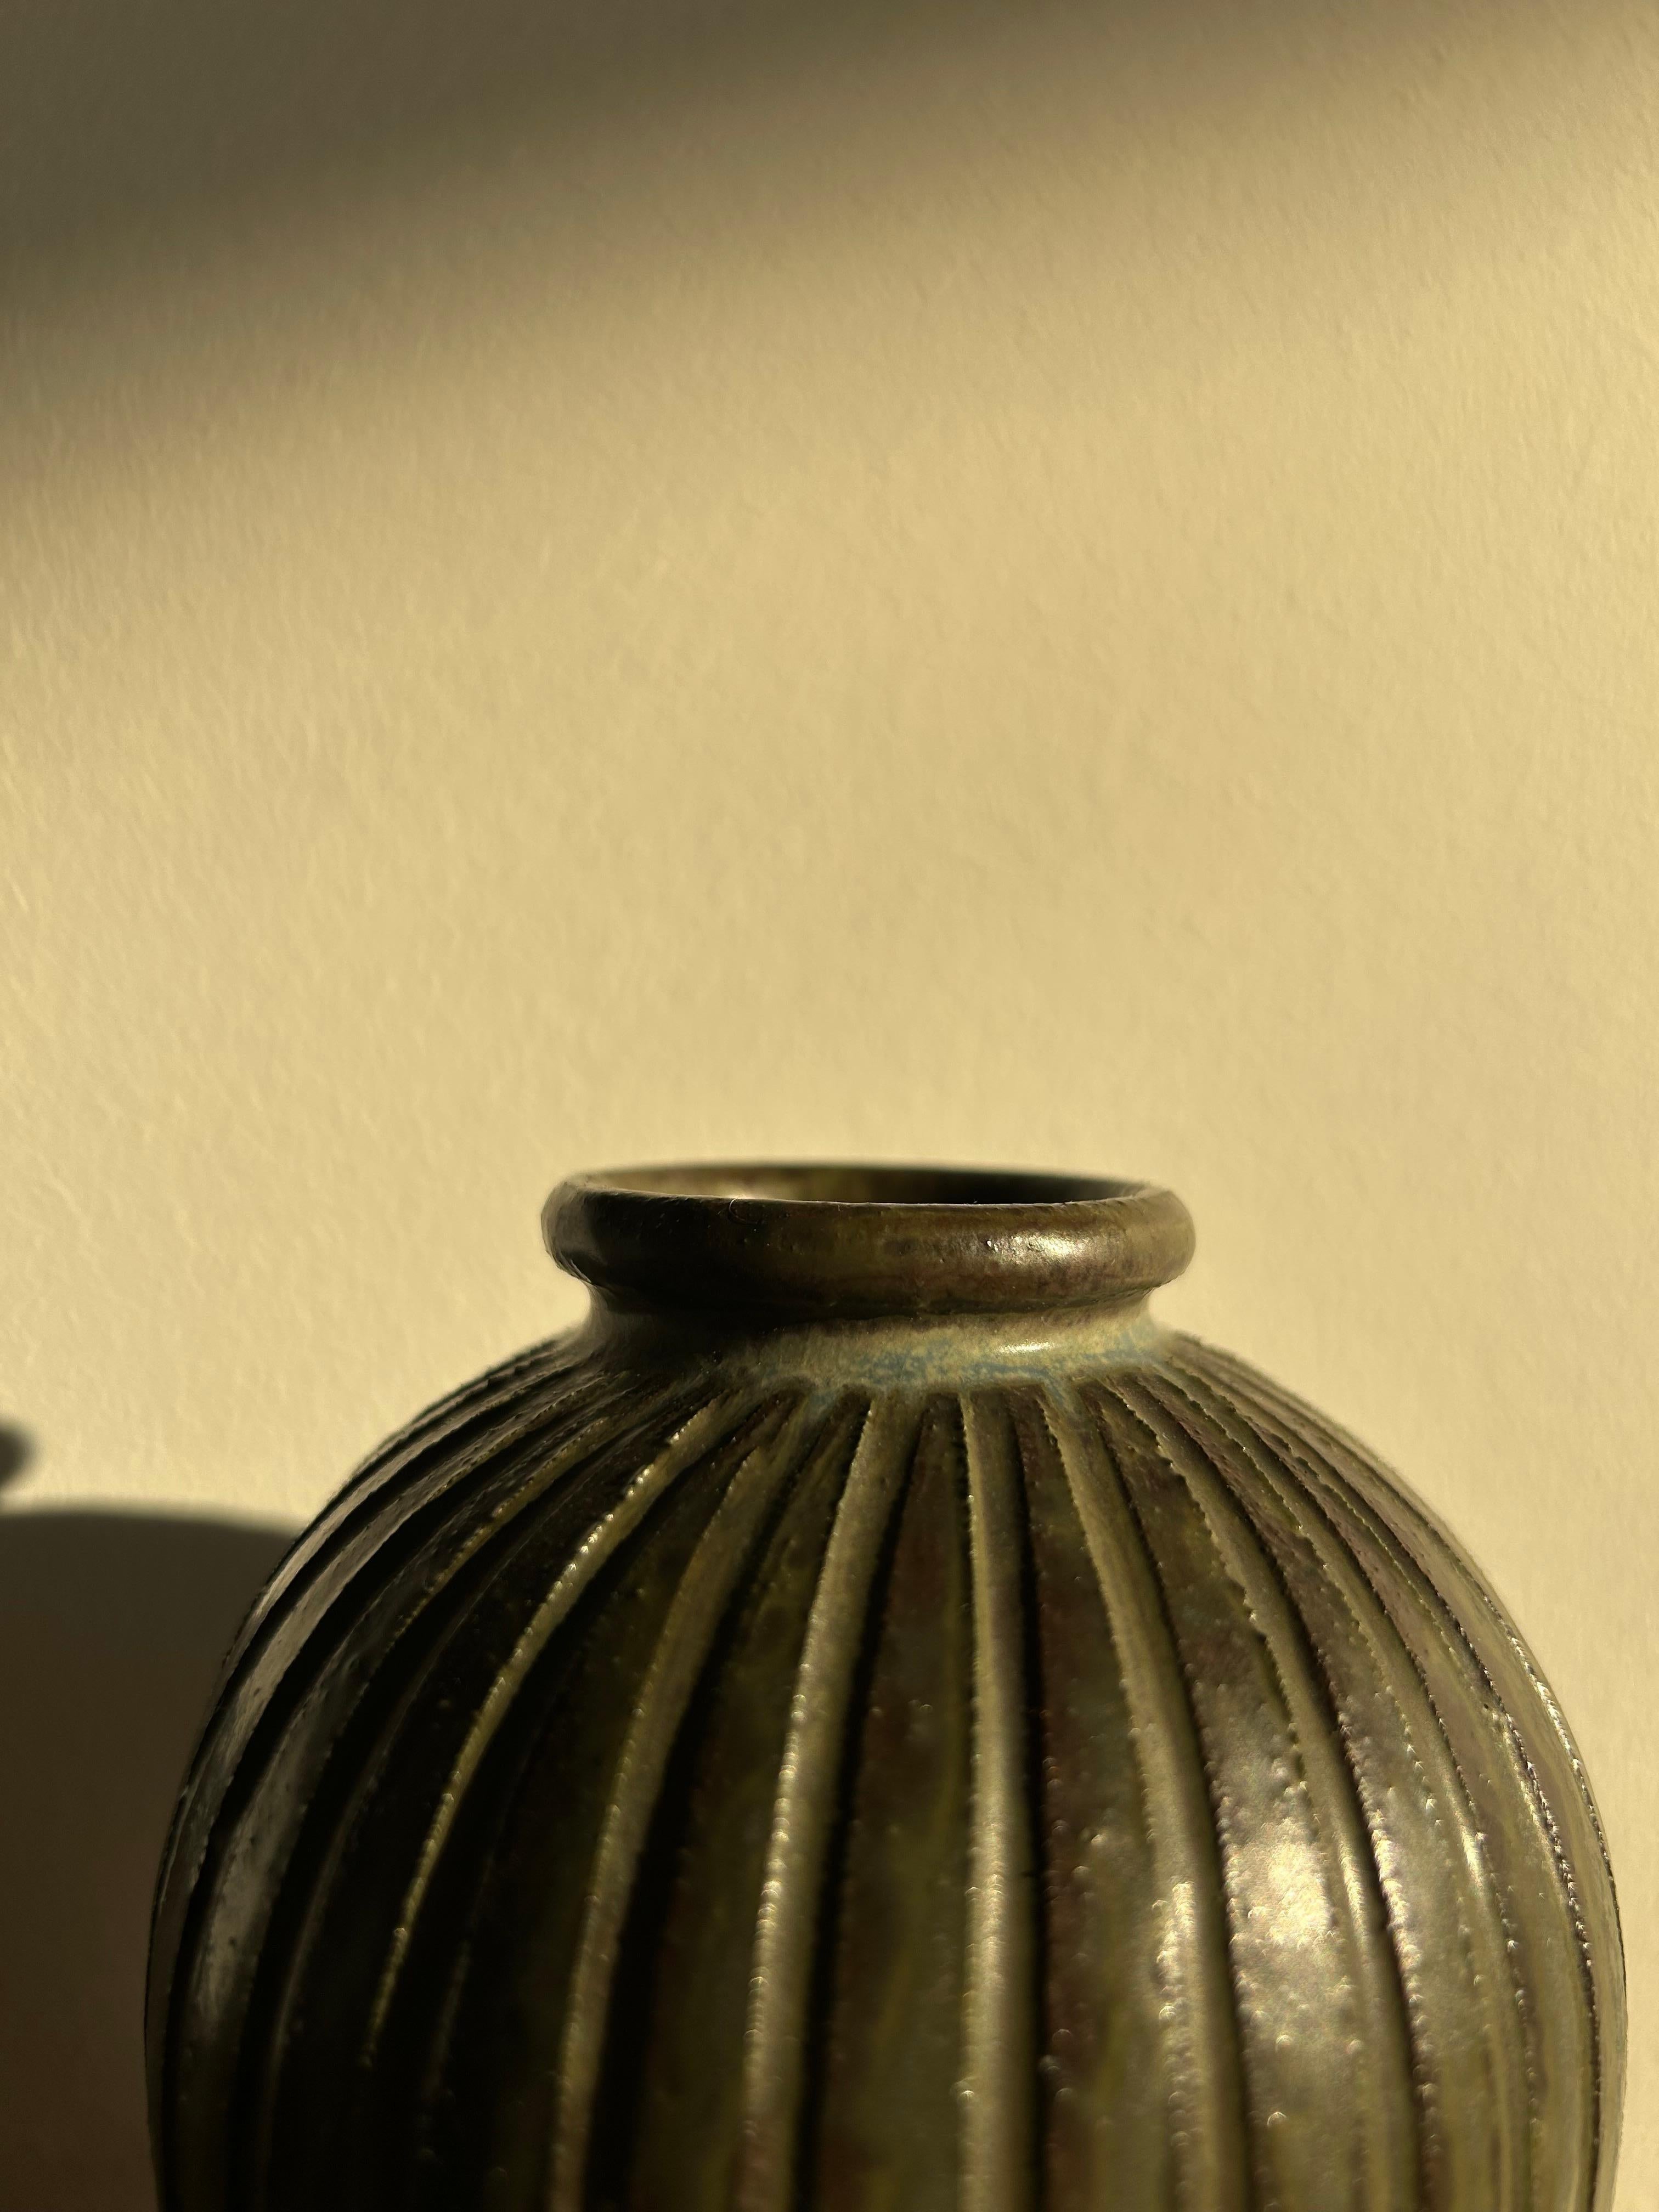 Arne Bang vase Model 124 In beautiful green and brown glaze made by Danish Artist Arne Bang in the 1940s.

The vase is in good original condition with no cracks or chips in the vase.

Arne Bang was trained as a sculptor and created sculptures